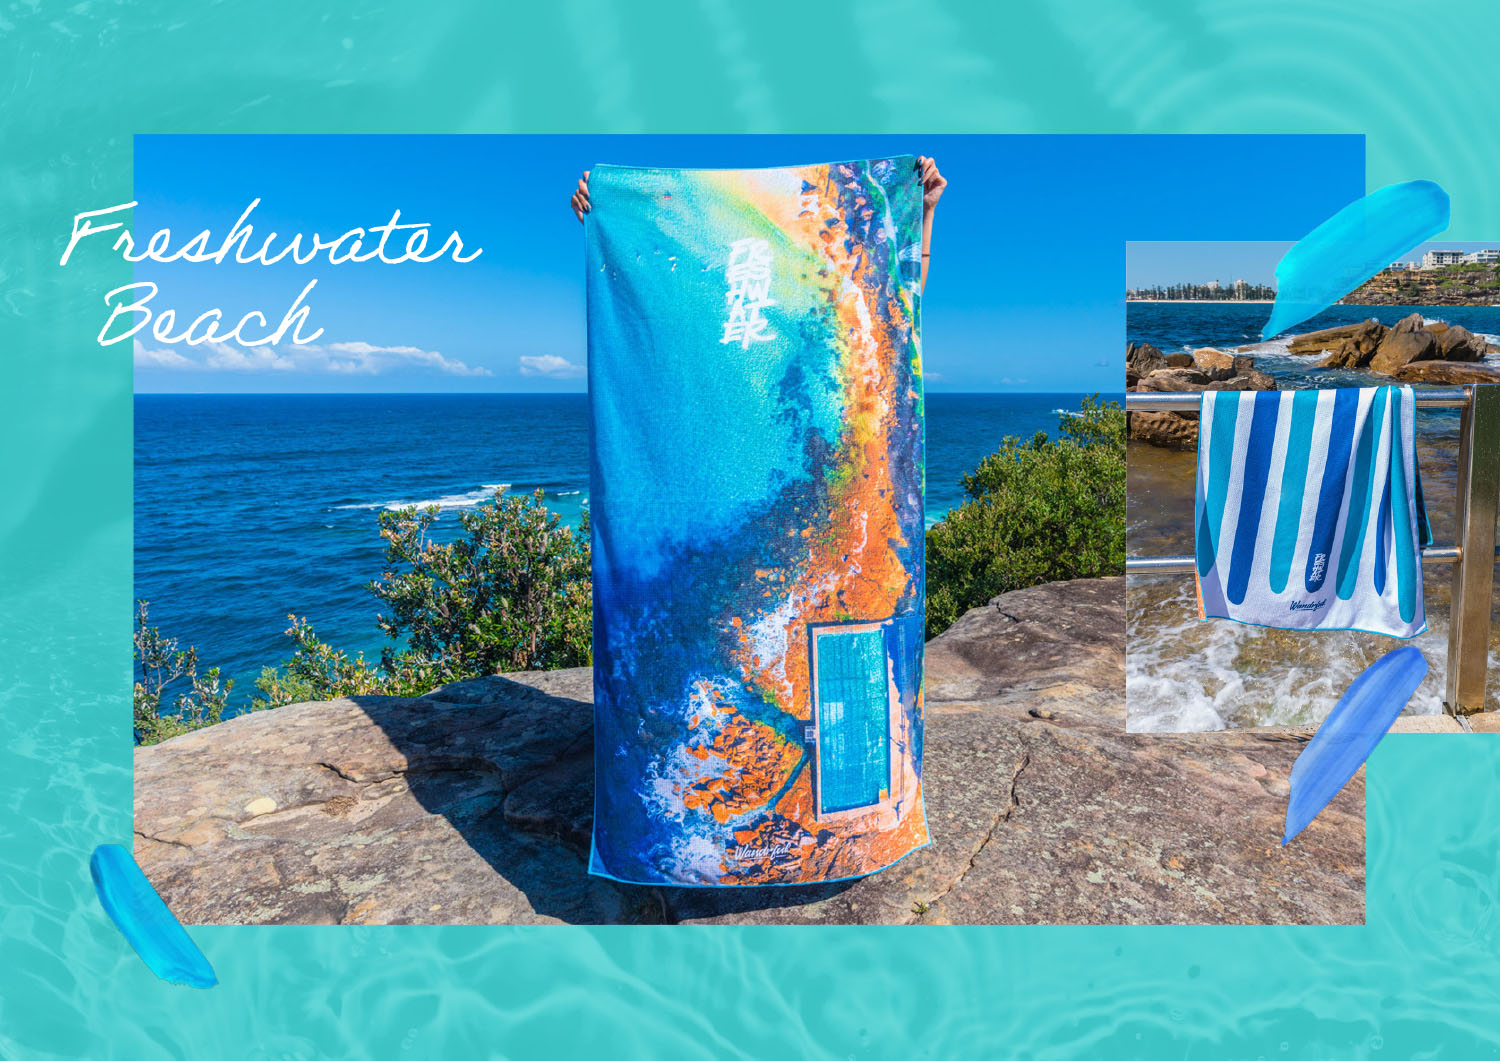 Wandrful sand-free beach towels at Freshwater Beach. Model using sand-free beach towel.